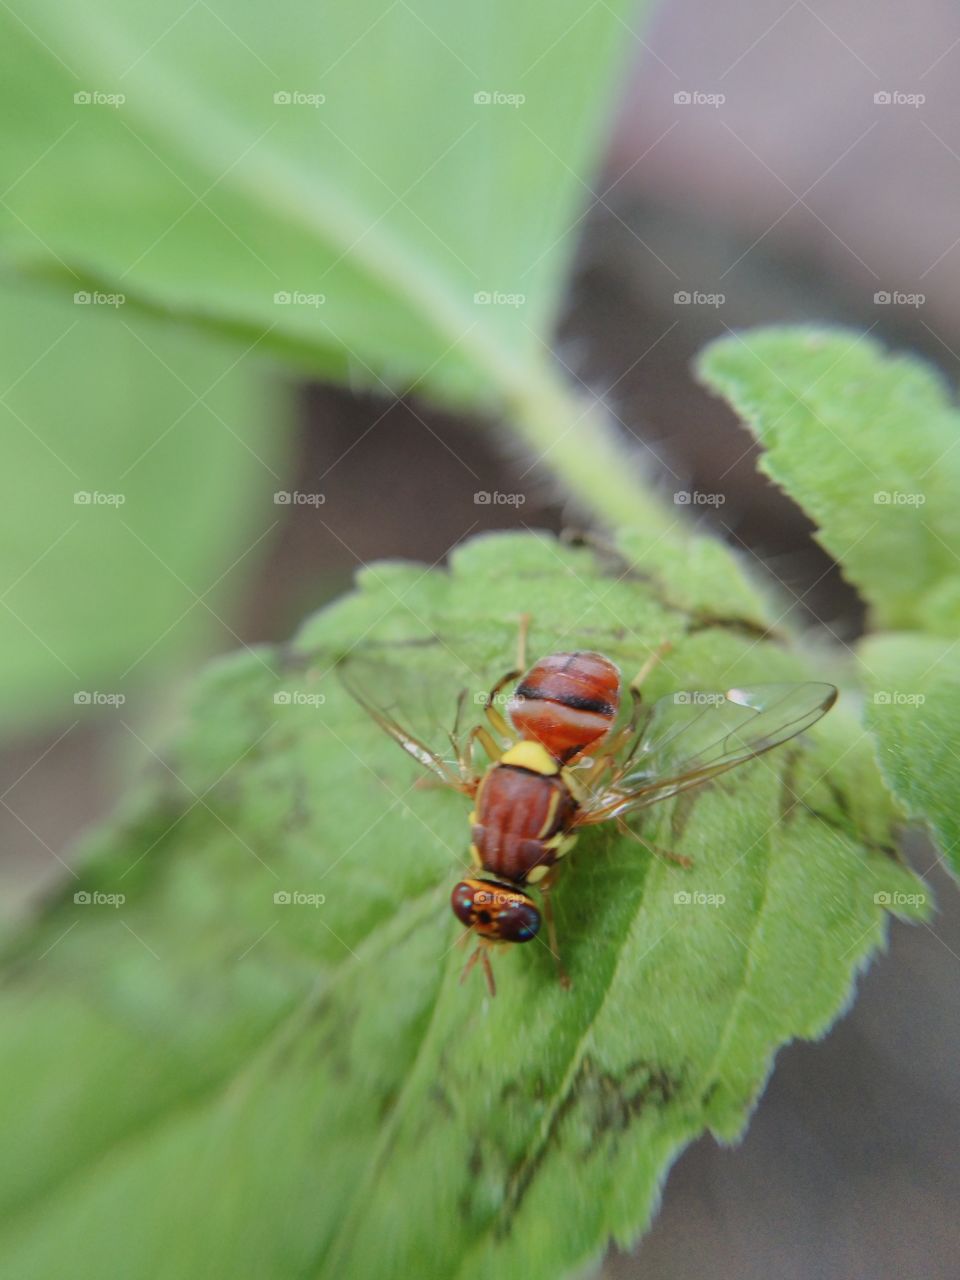 Small insect on leaf